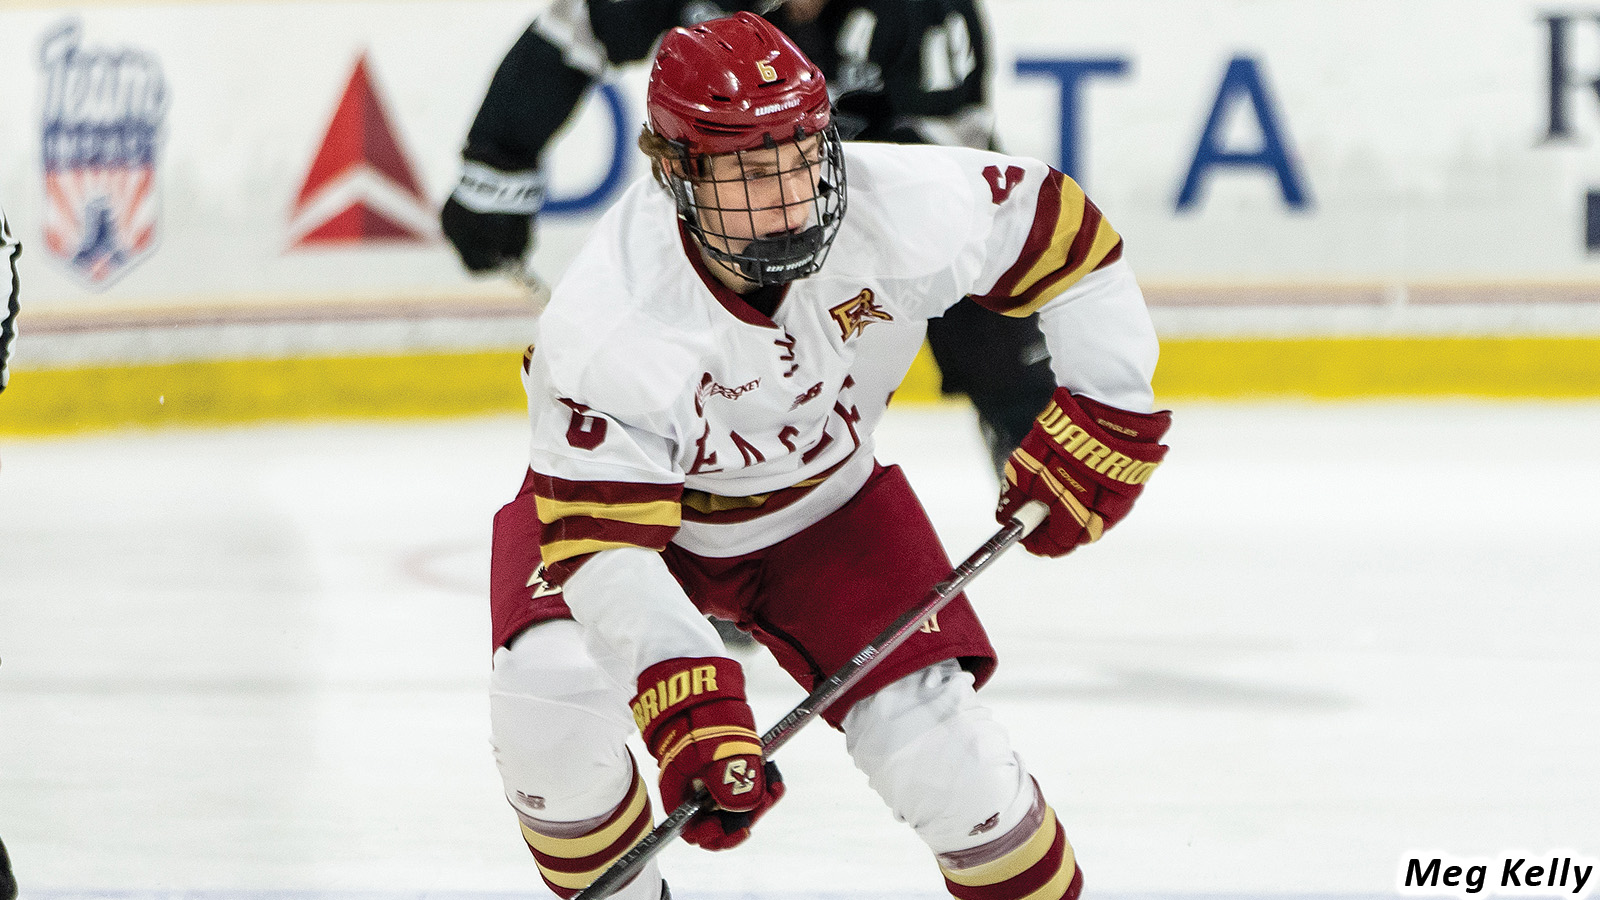 Servello’s View: Teams that could win the NCAA Division I Ice Hockey Tournament